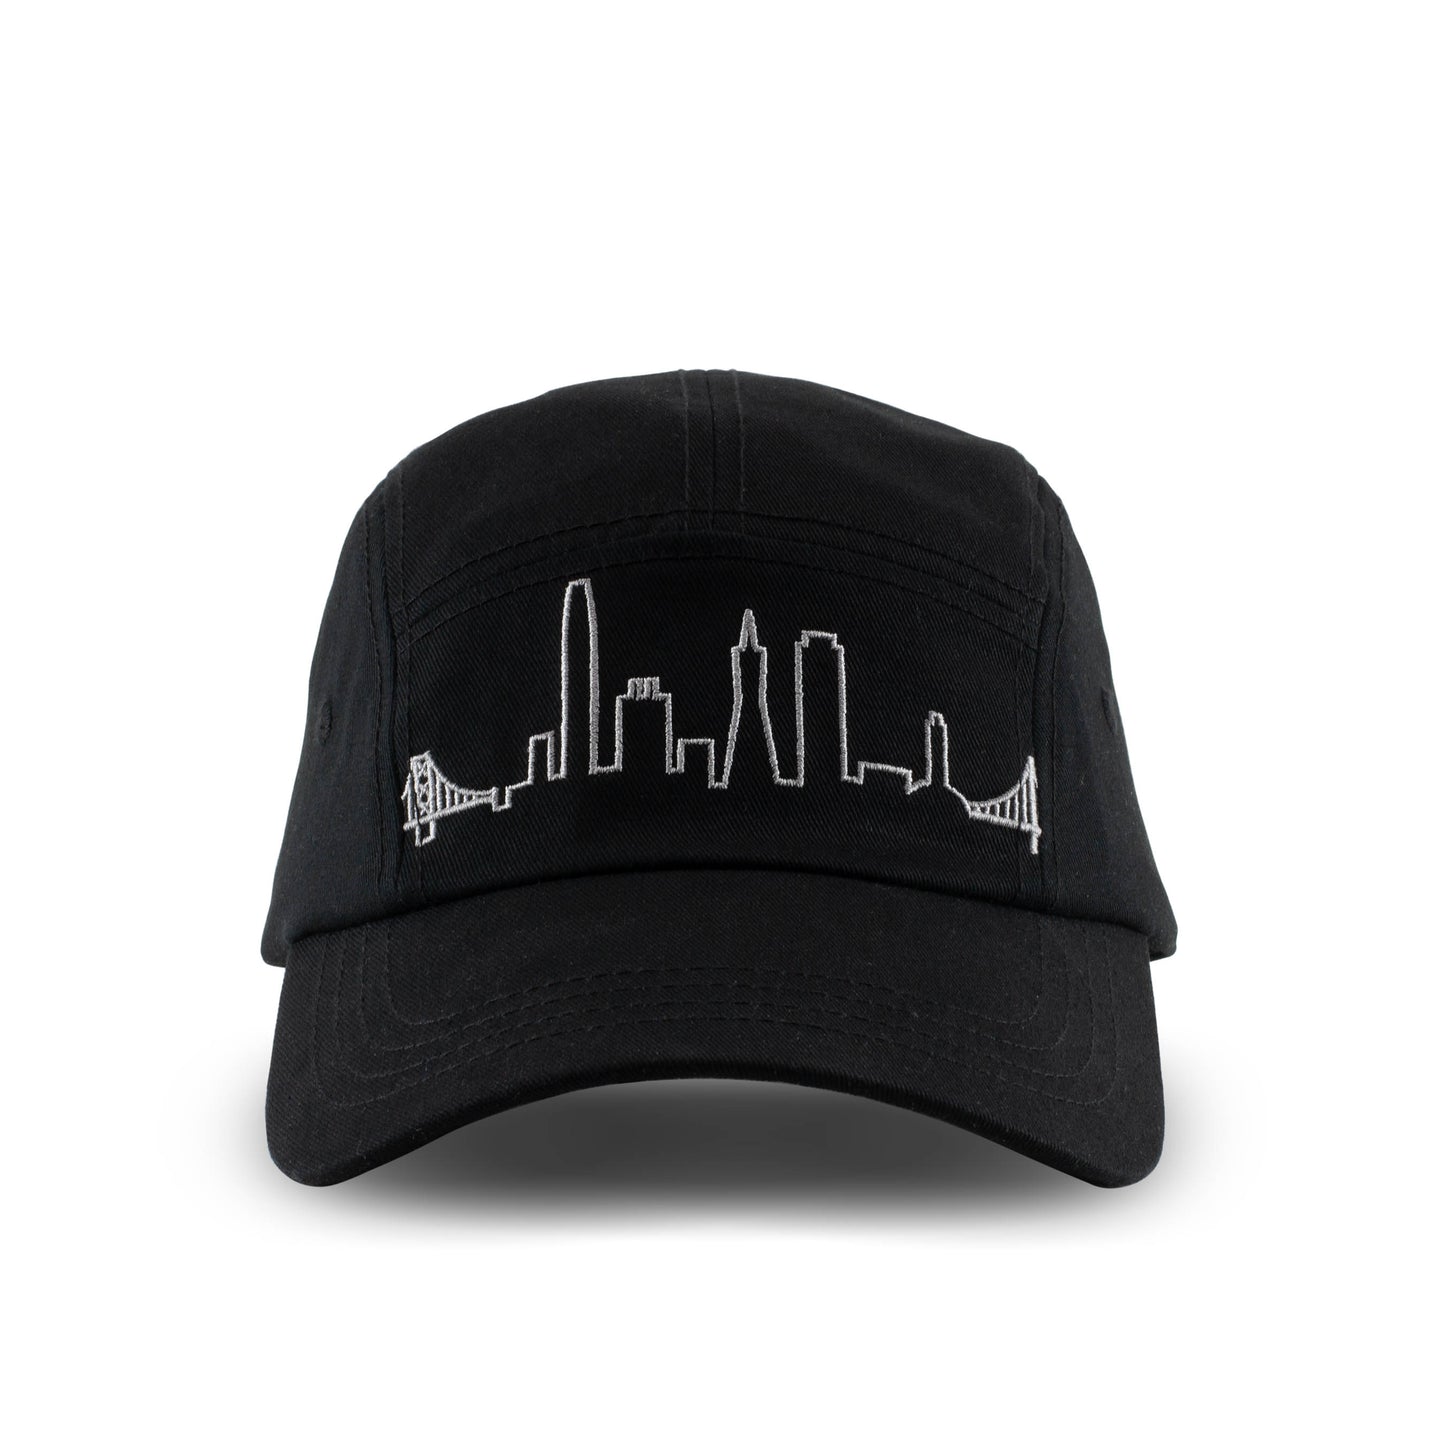 Black baseball cap with silver embroidered design of San Francisco's skyline on front panels.